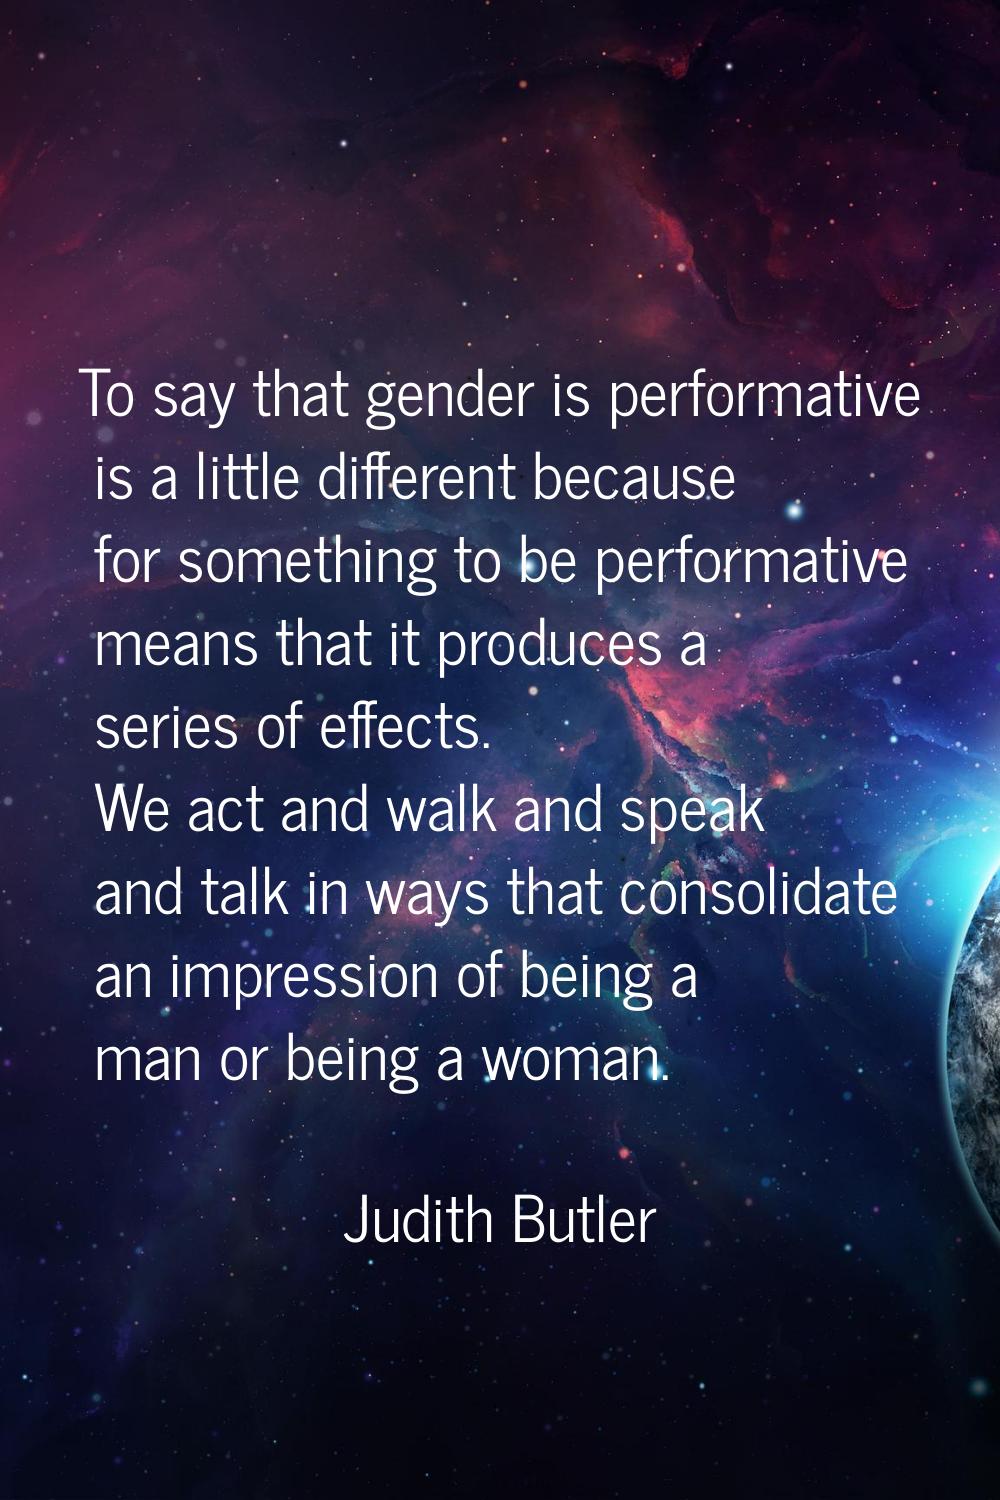 To say that gender is performative is a little different because for something to be performative m